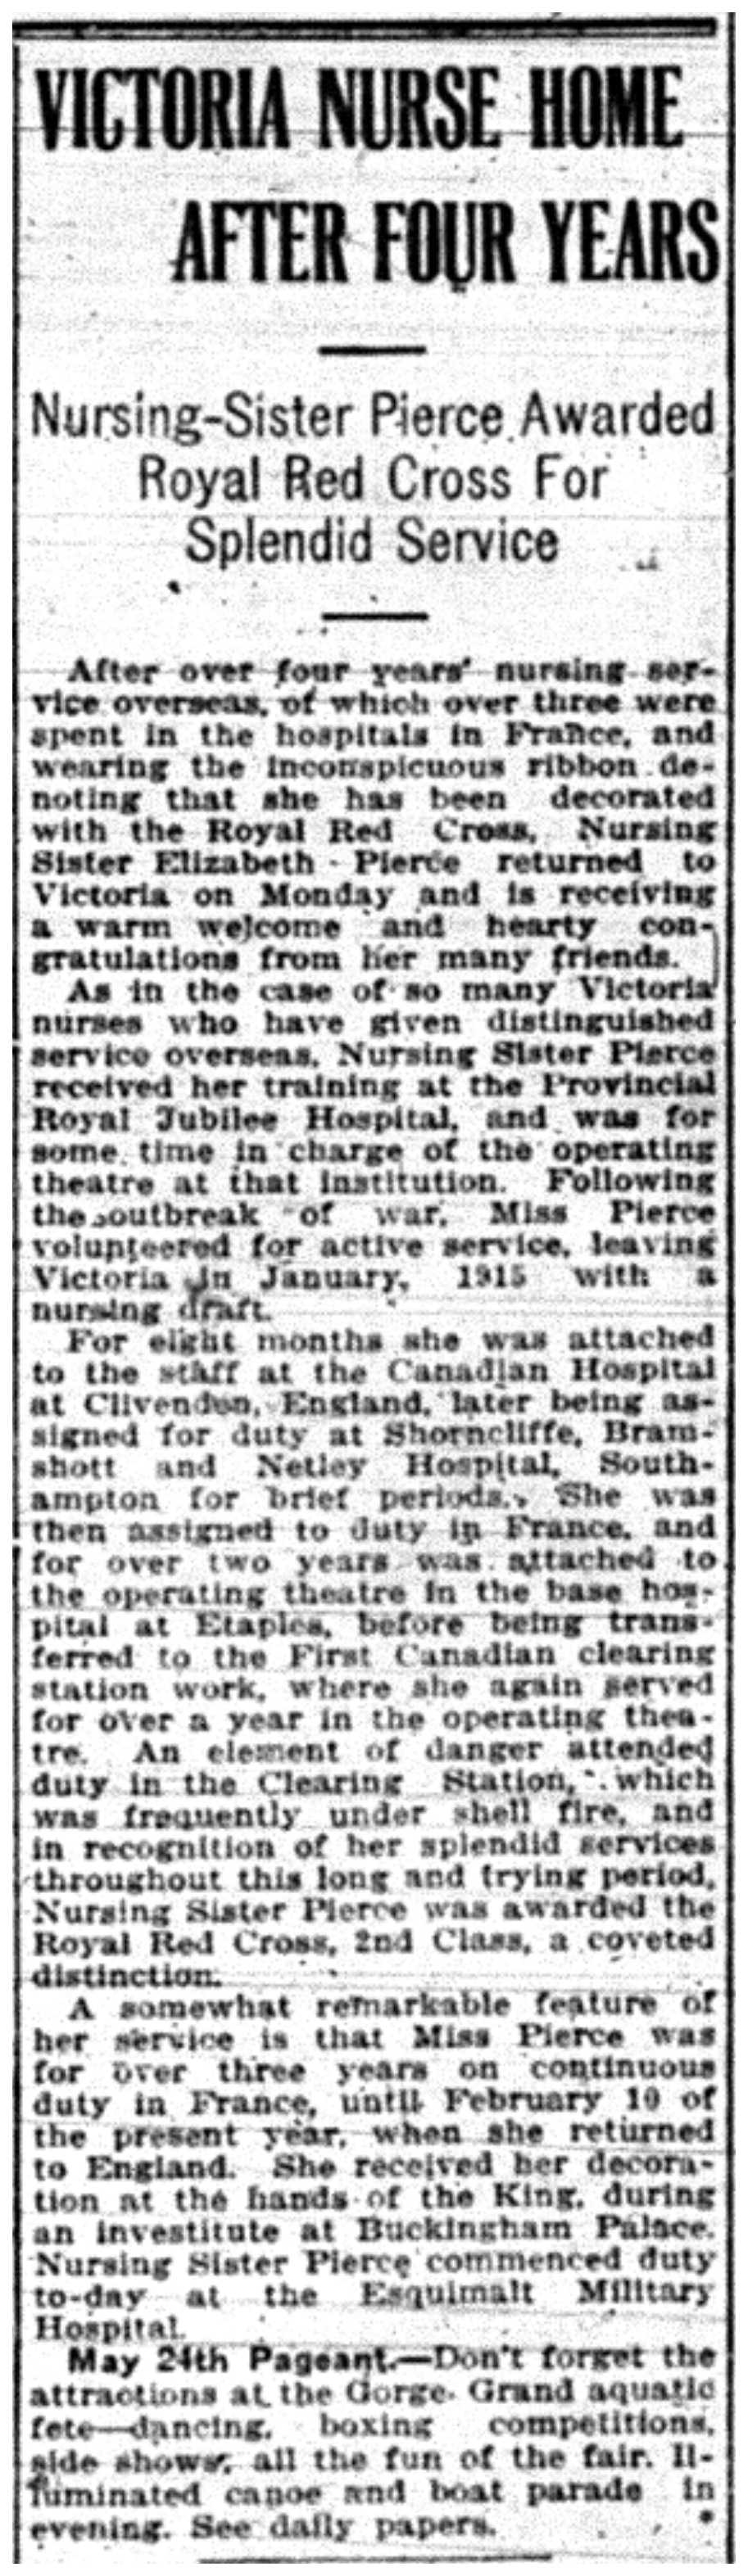 "Victoria Nurse Home After Four Years"